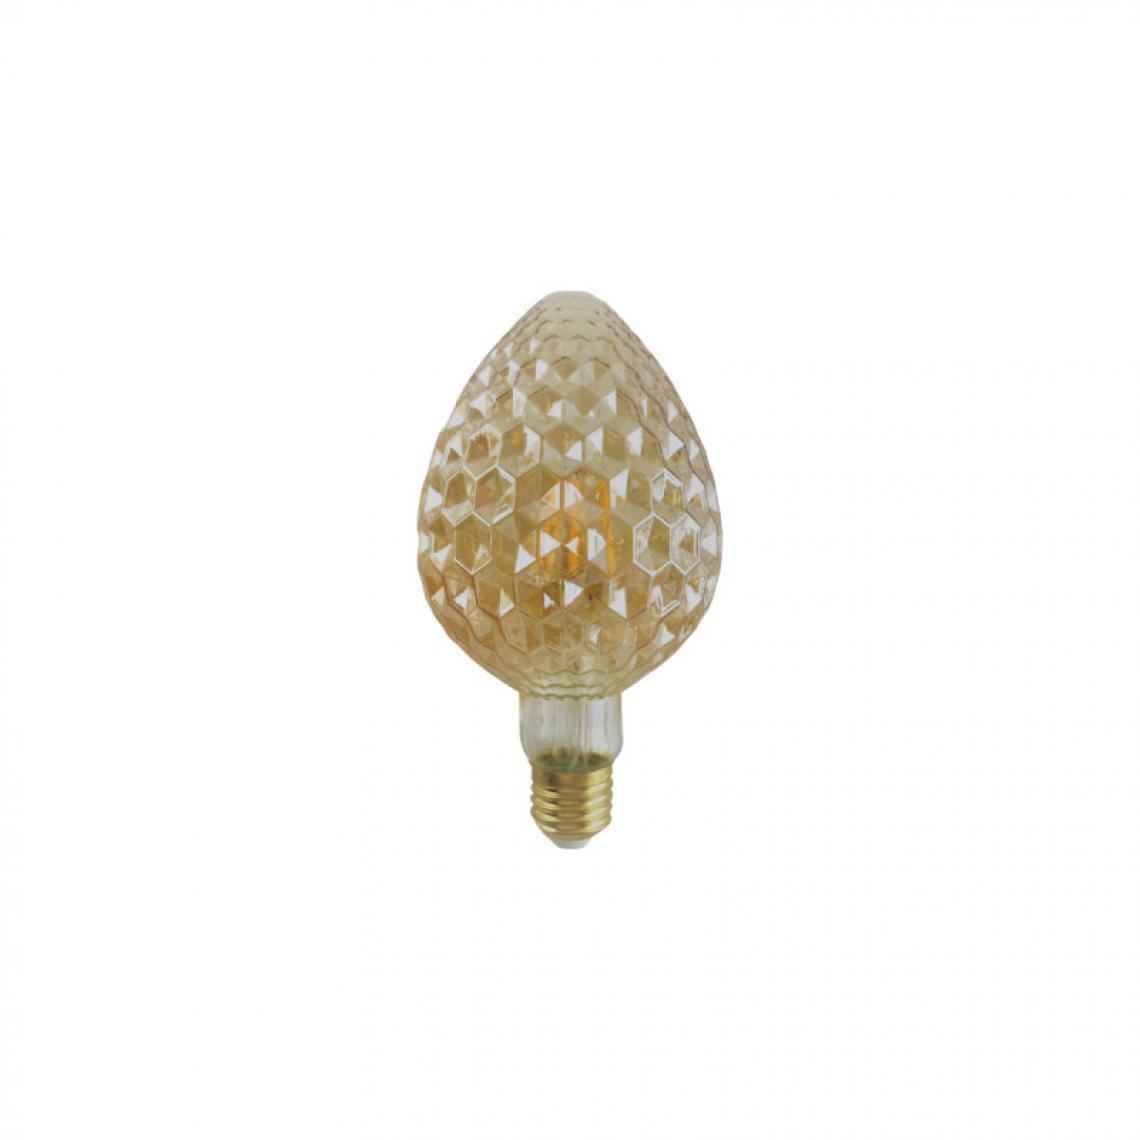 Xxcell - Ampoule LED ananas XXCELL - 6 W - 500 lumens - 2700 K - E27 - Ampoules LED